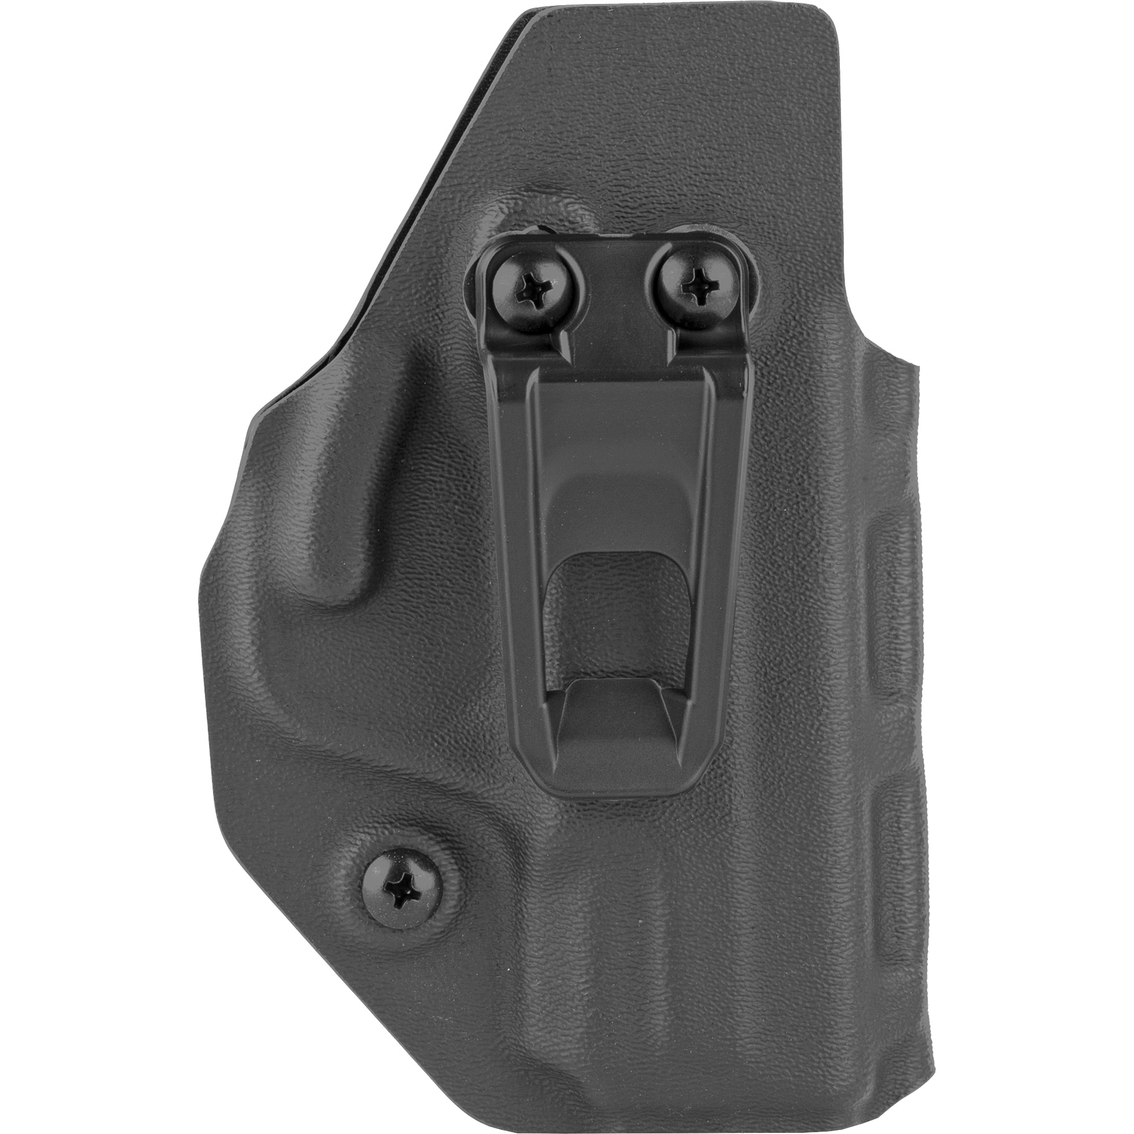 Crucial Concealment IWB Holster S&W Shield 9/40 - Image 2 of 2